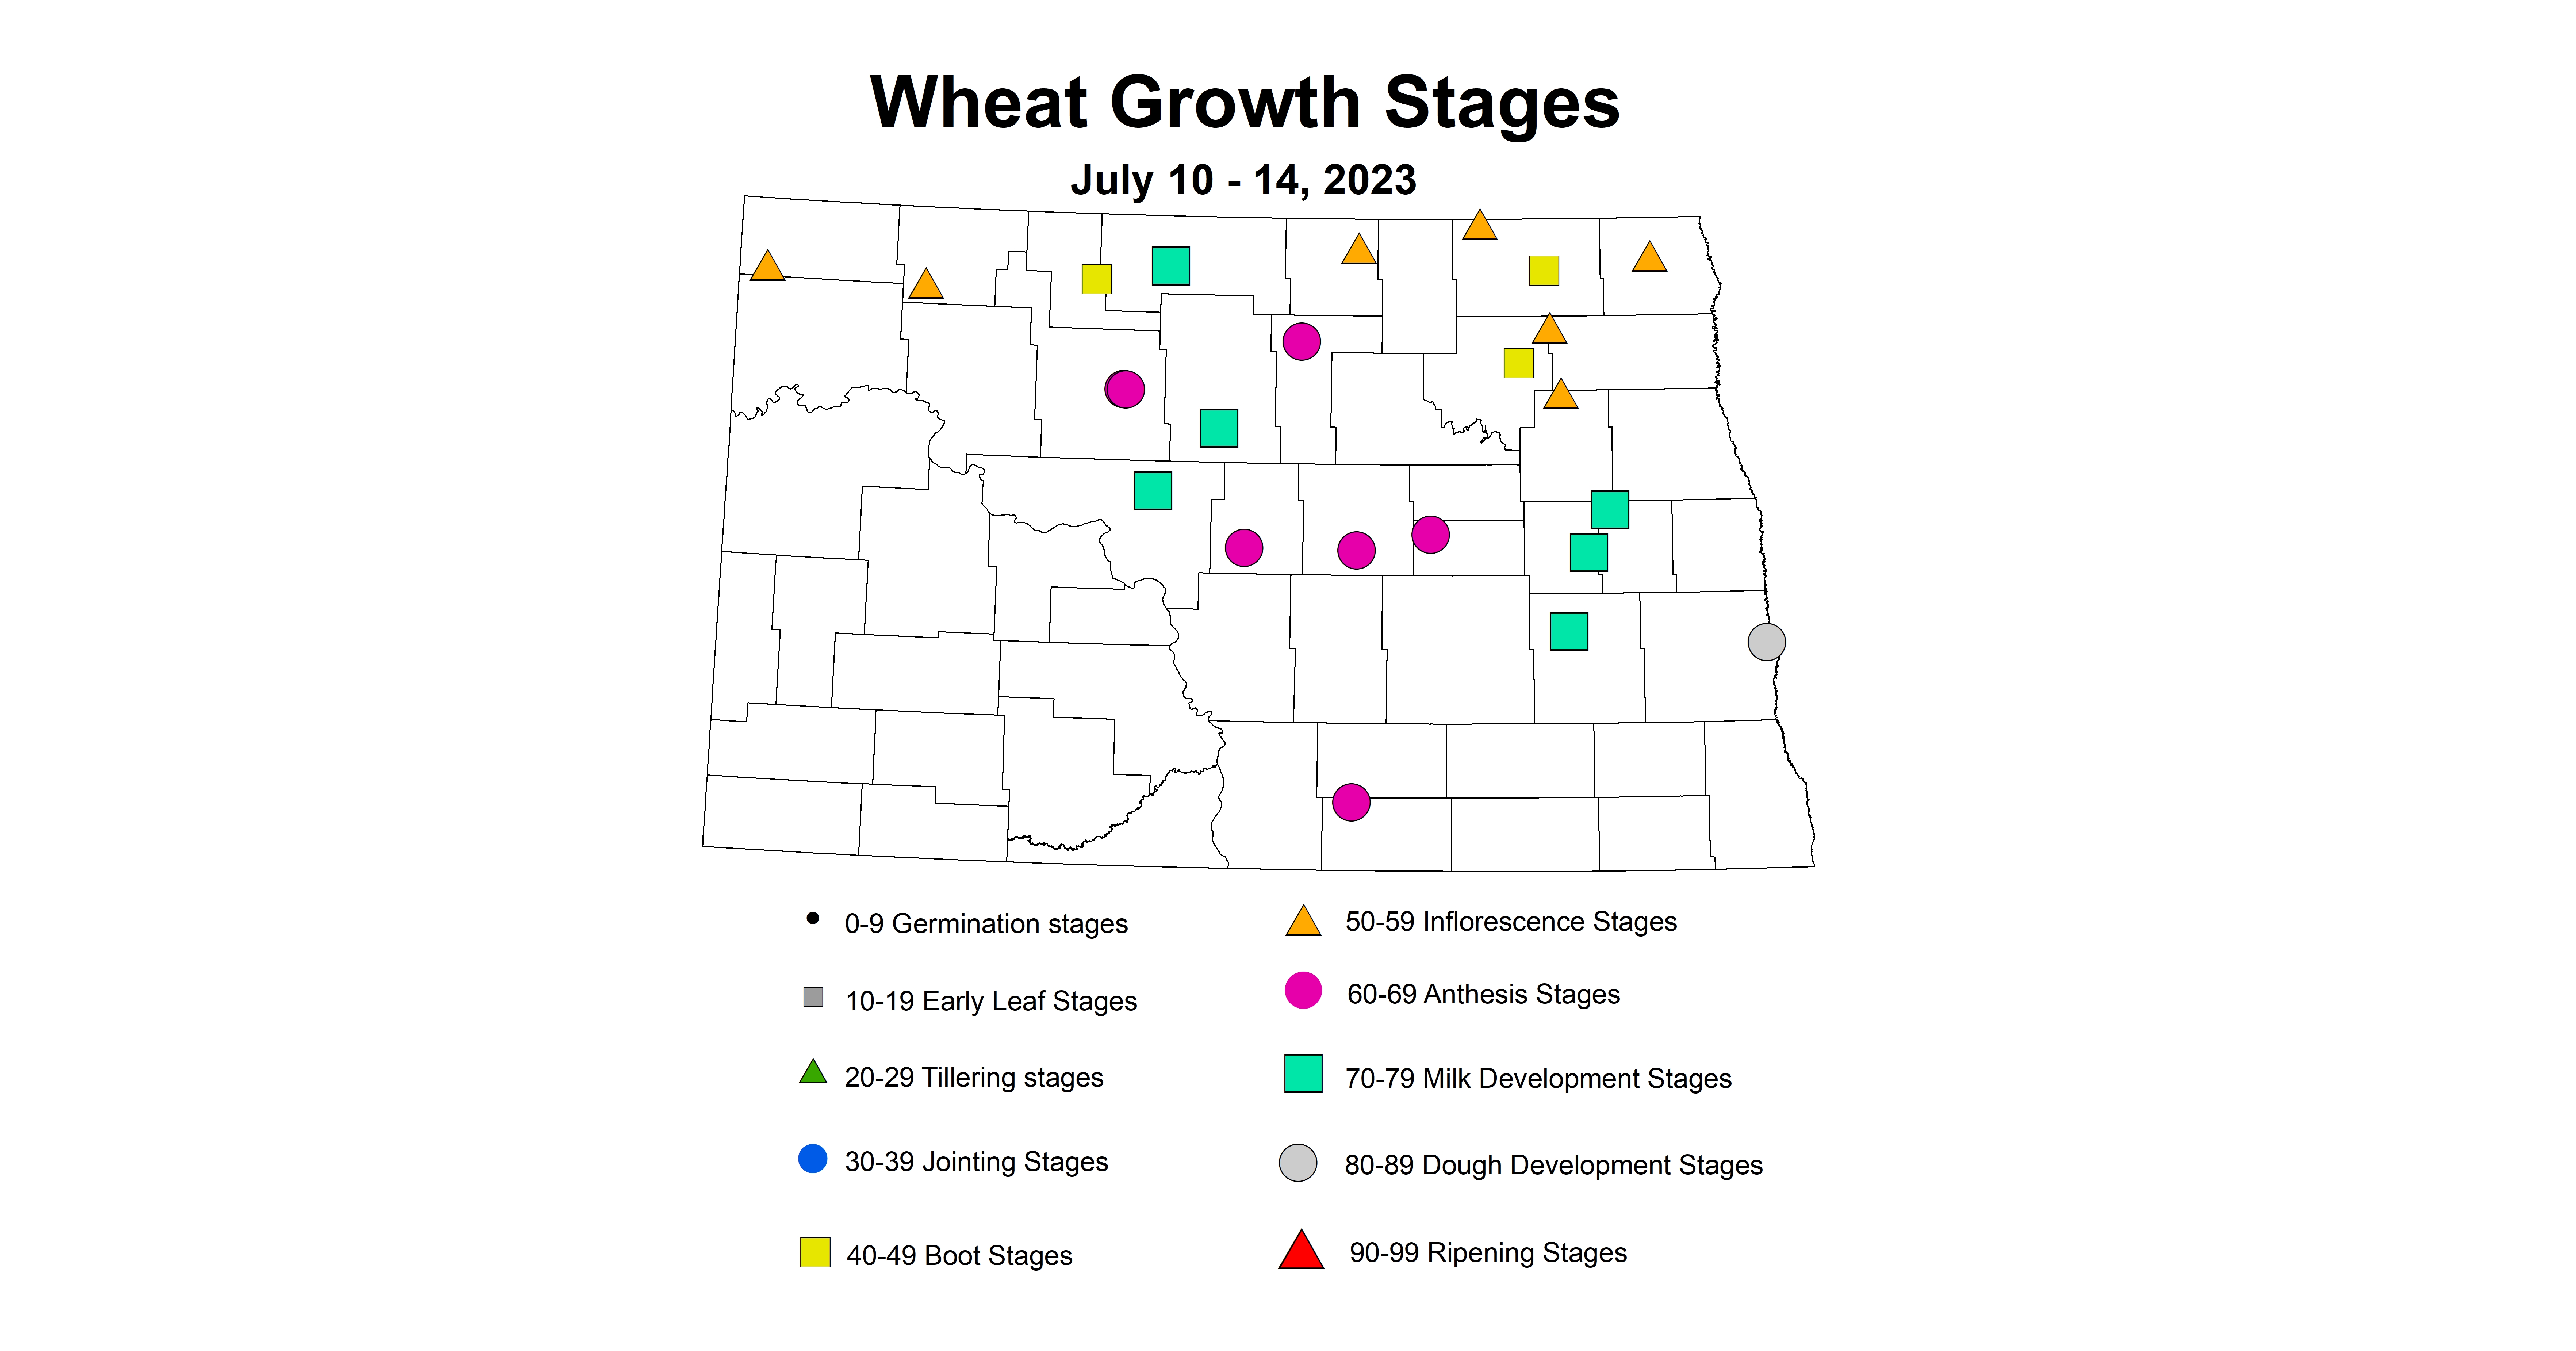 corrected wheat insect trap growth stages July 10-14 2023